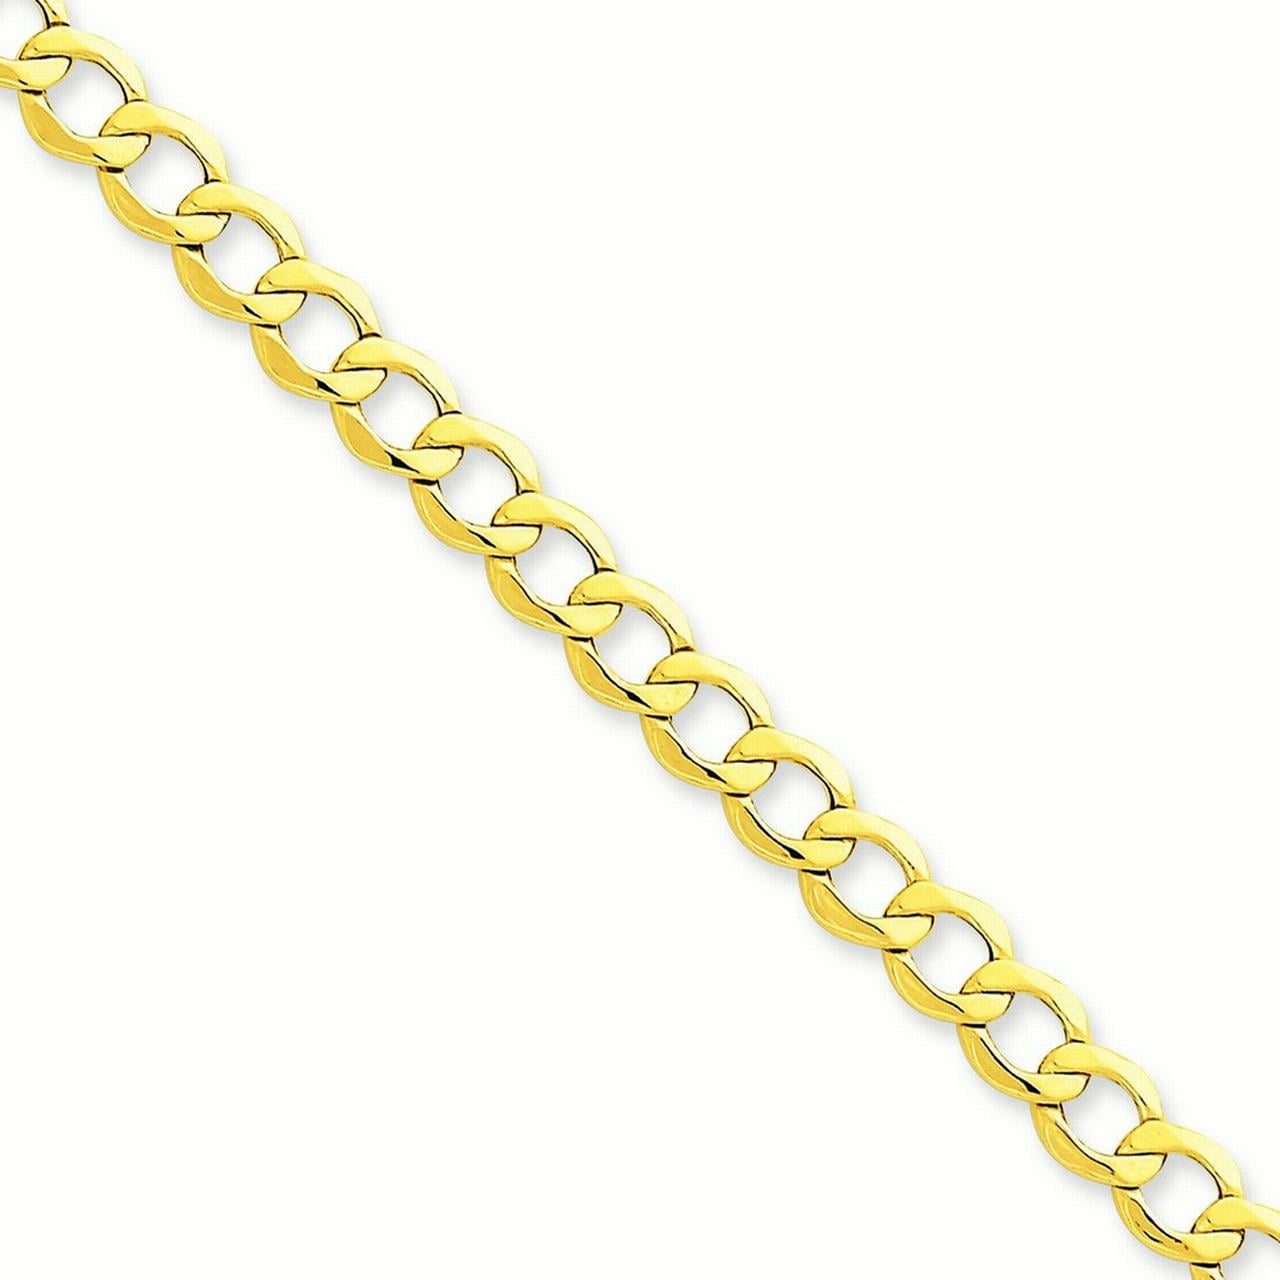 4.3mm 14k Engravable Semi solid Figaro Link ID Bracelet Jewelry Gifts for Women 6 7 Length Options 